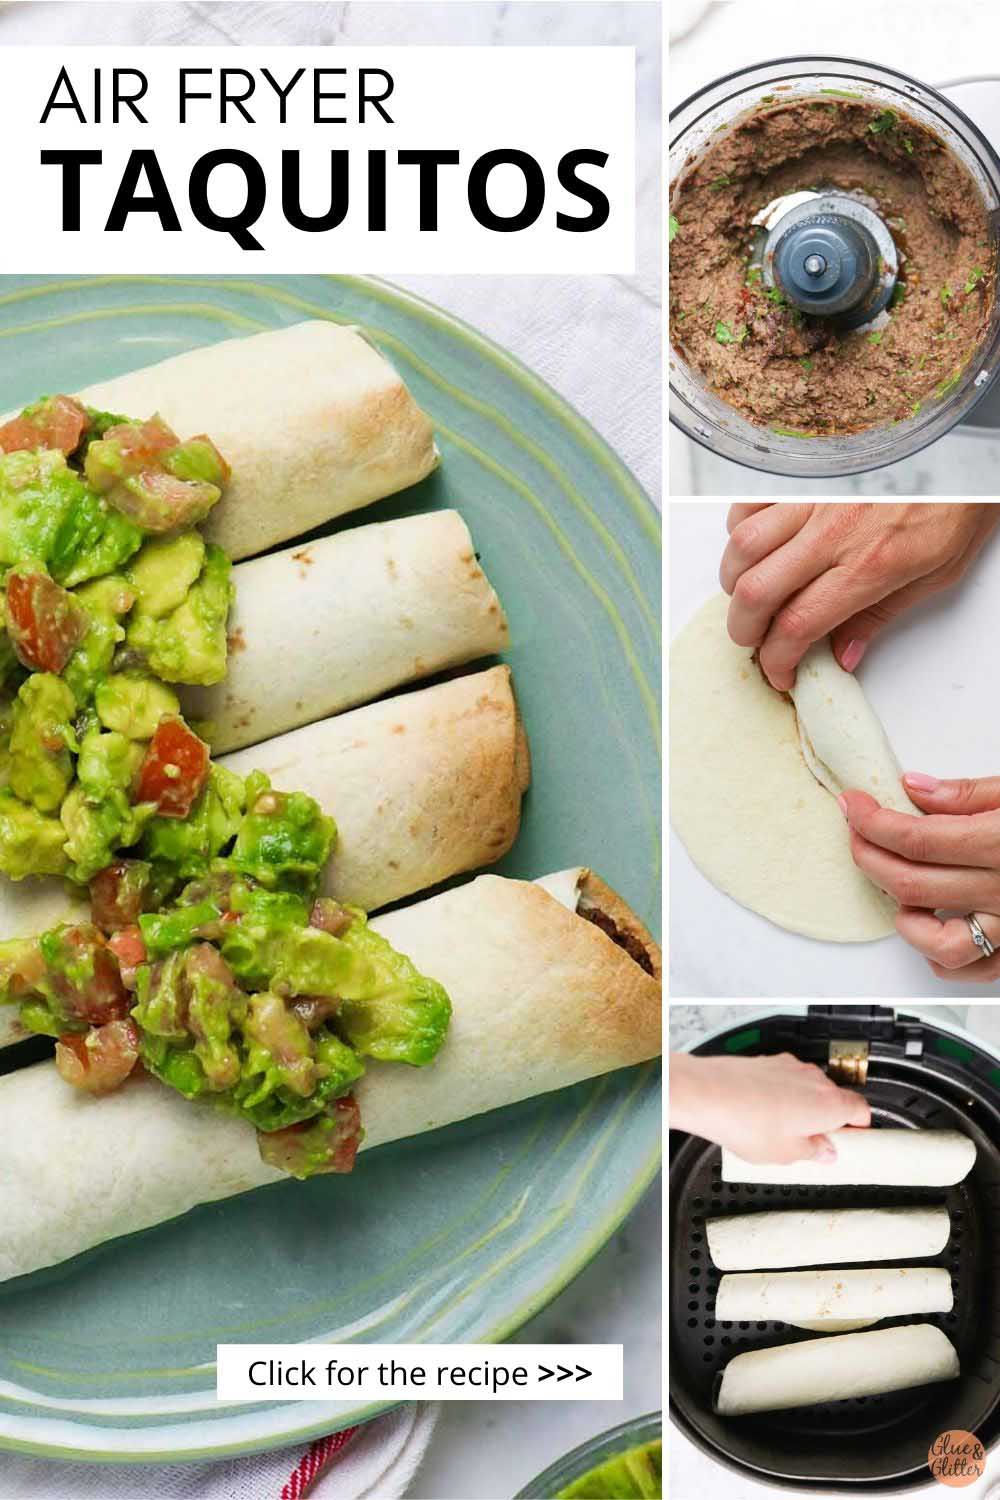 image collage showing blue plate of air fryer taquitos topped with avocado salad, the filling, and rolling and placing the taquitos into the air fryer basket